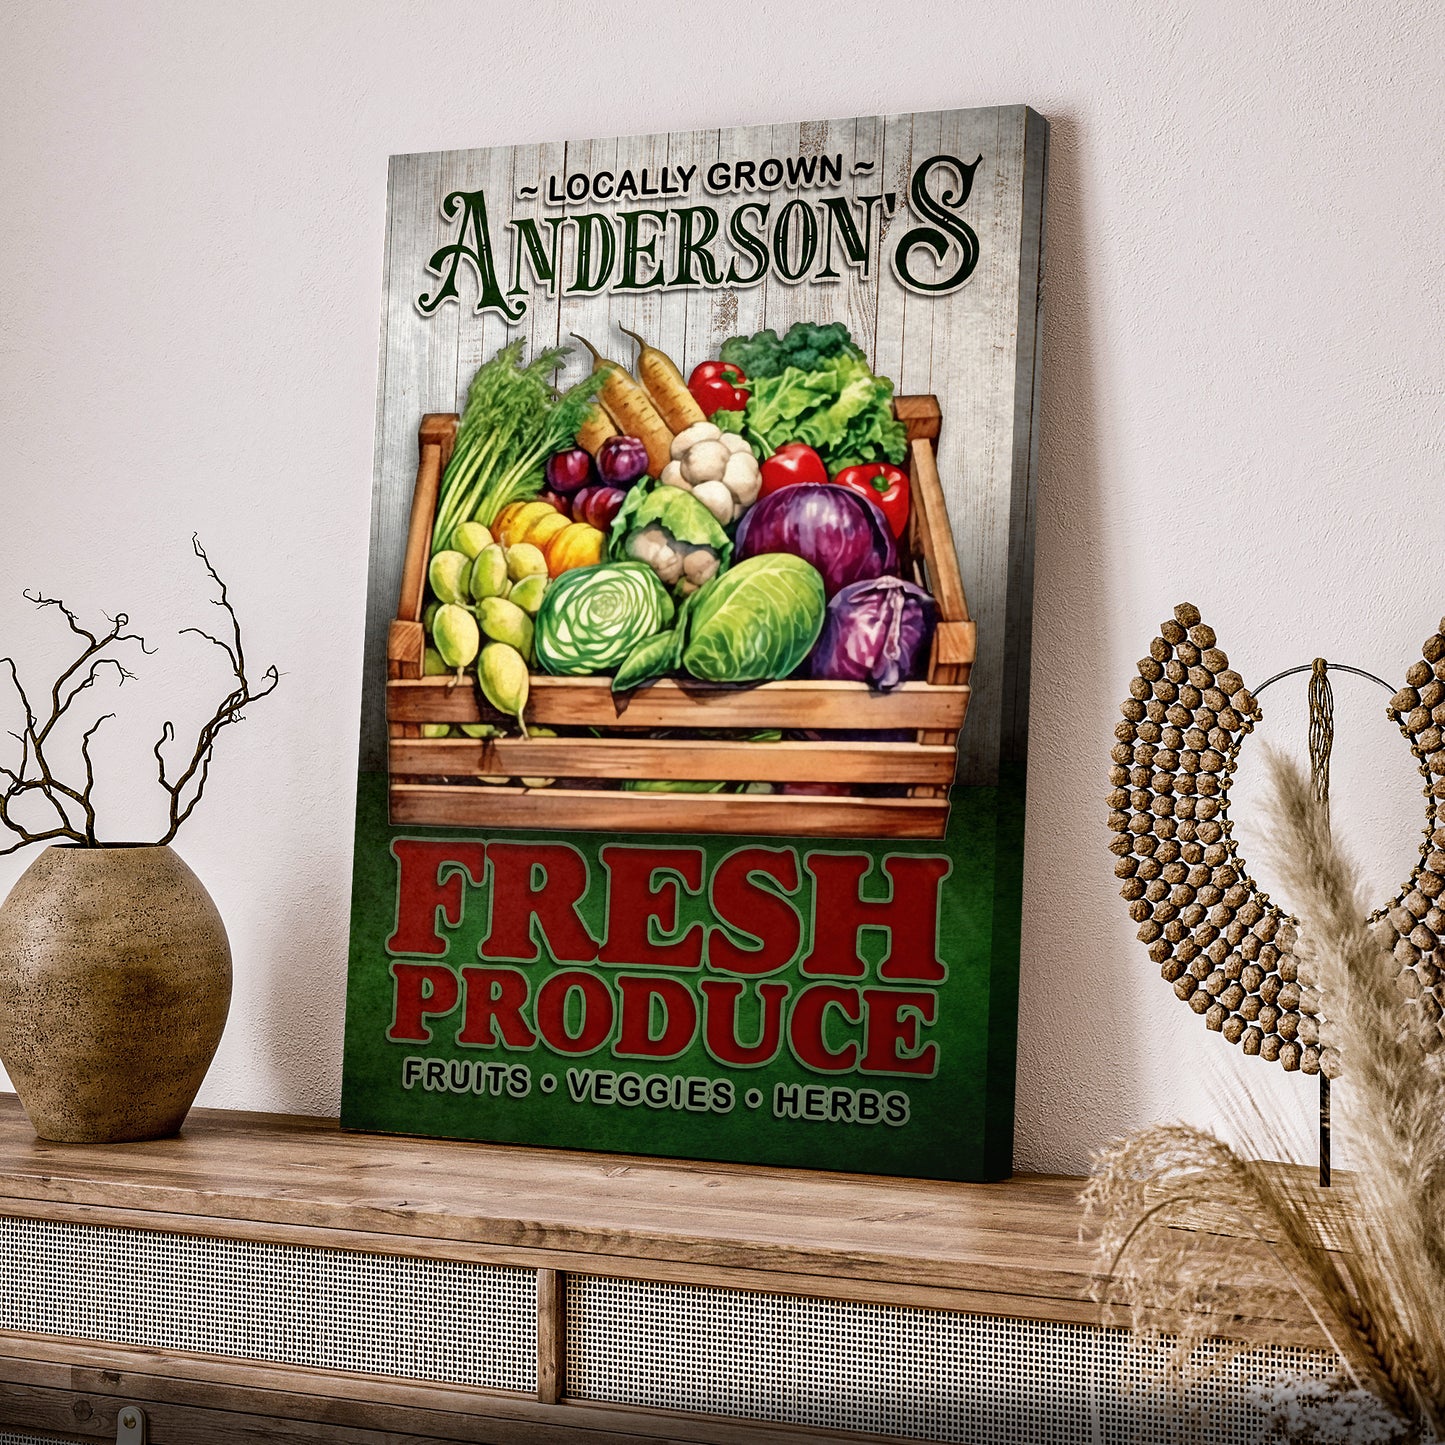 Locally Grown Fresh Produce Sign  - Image by Tailored Canvases